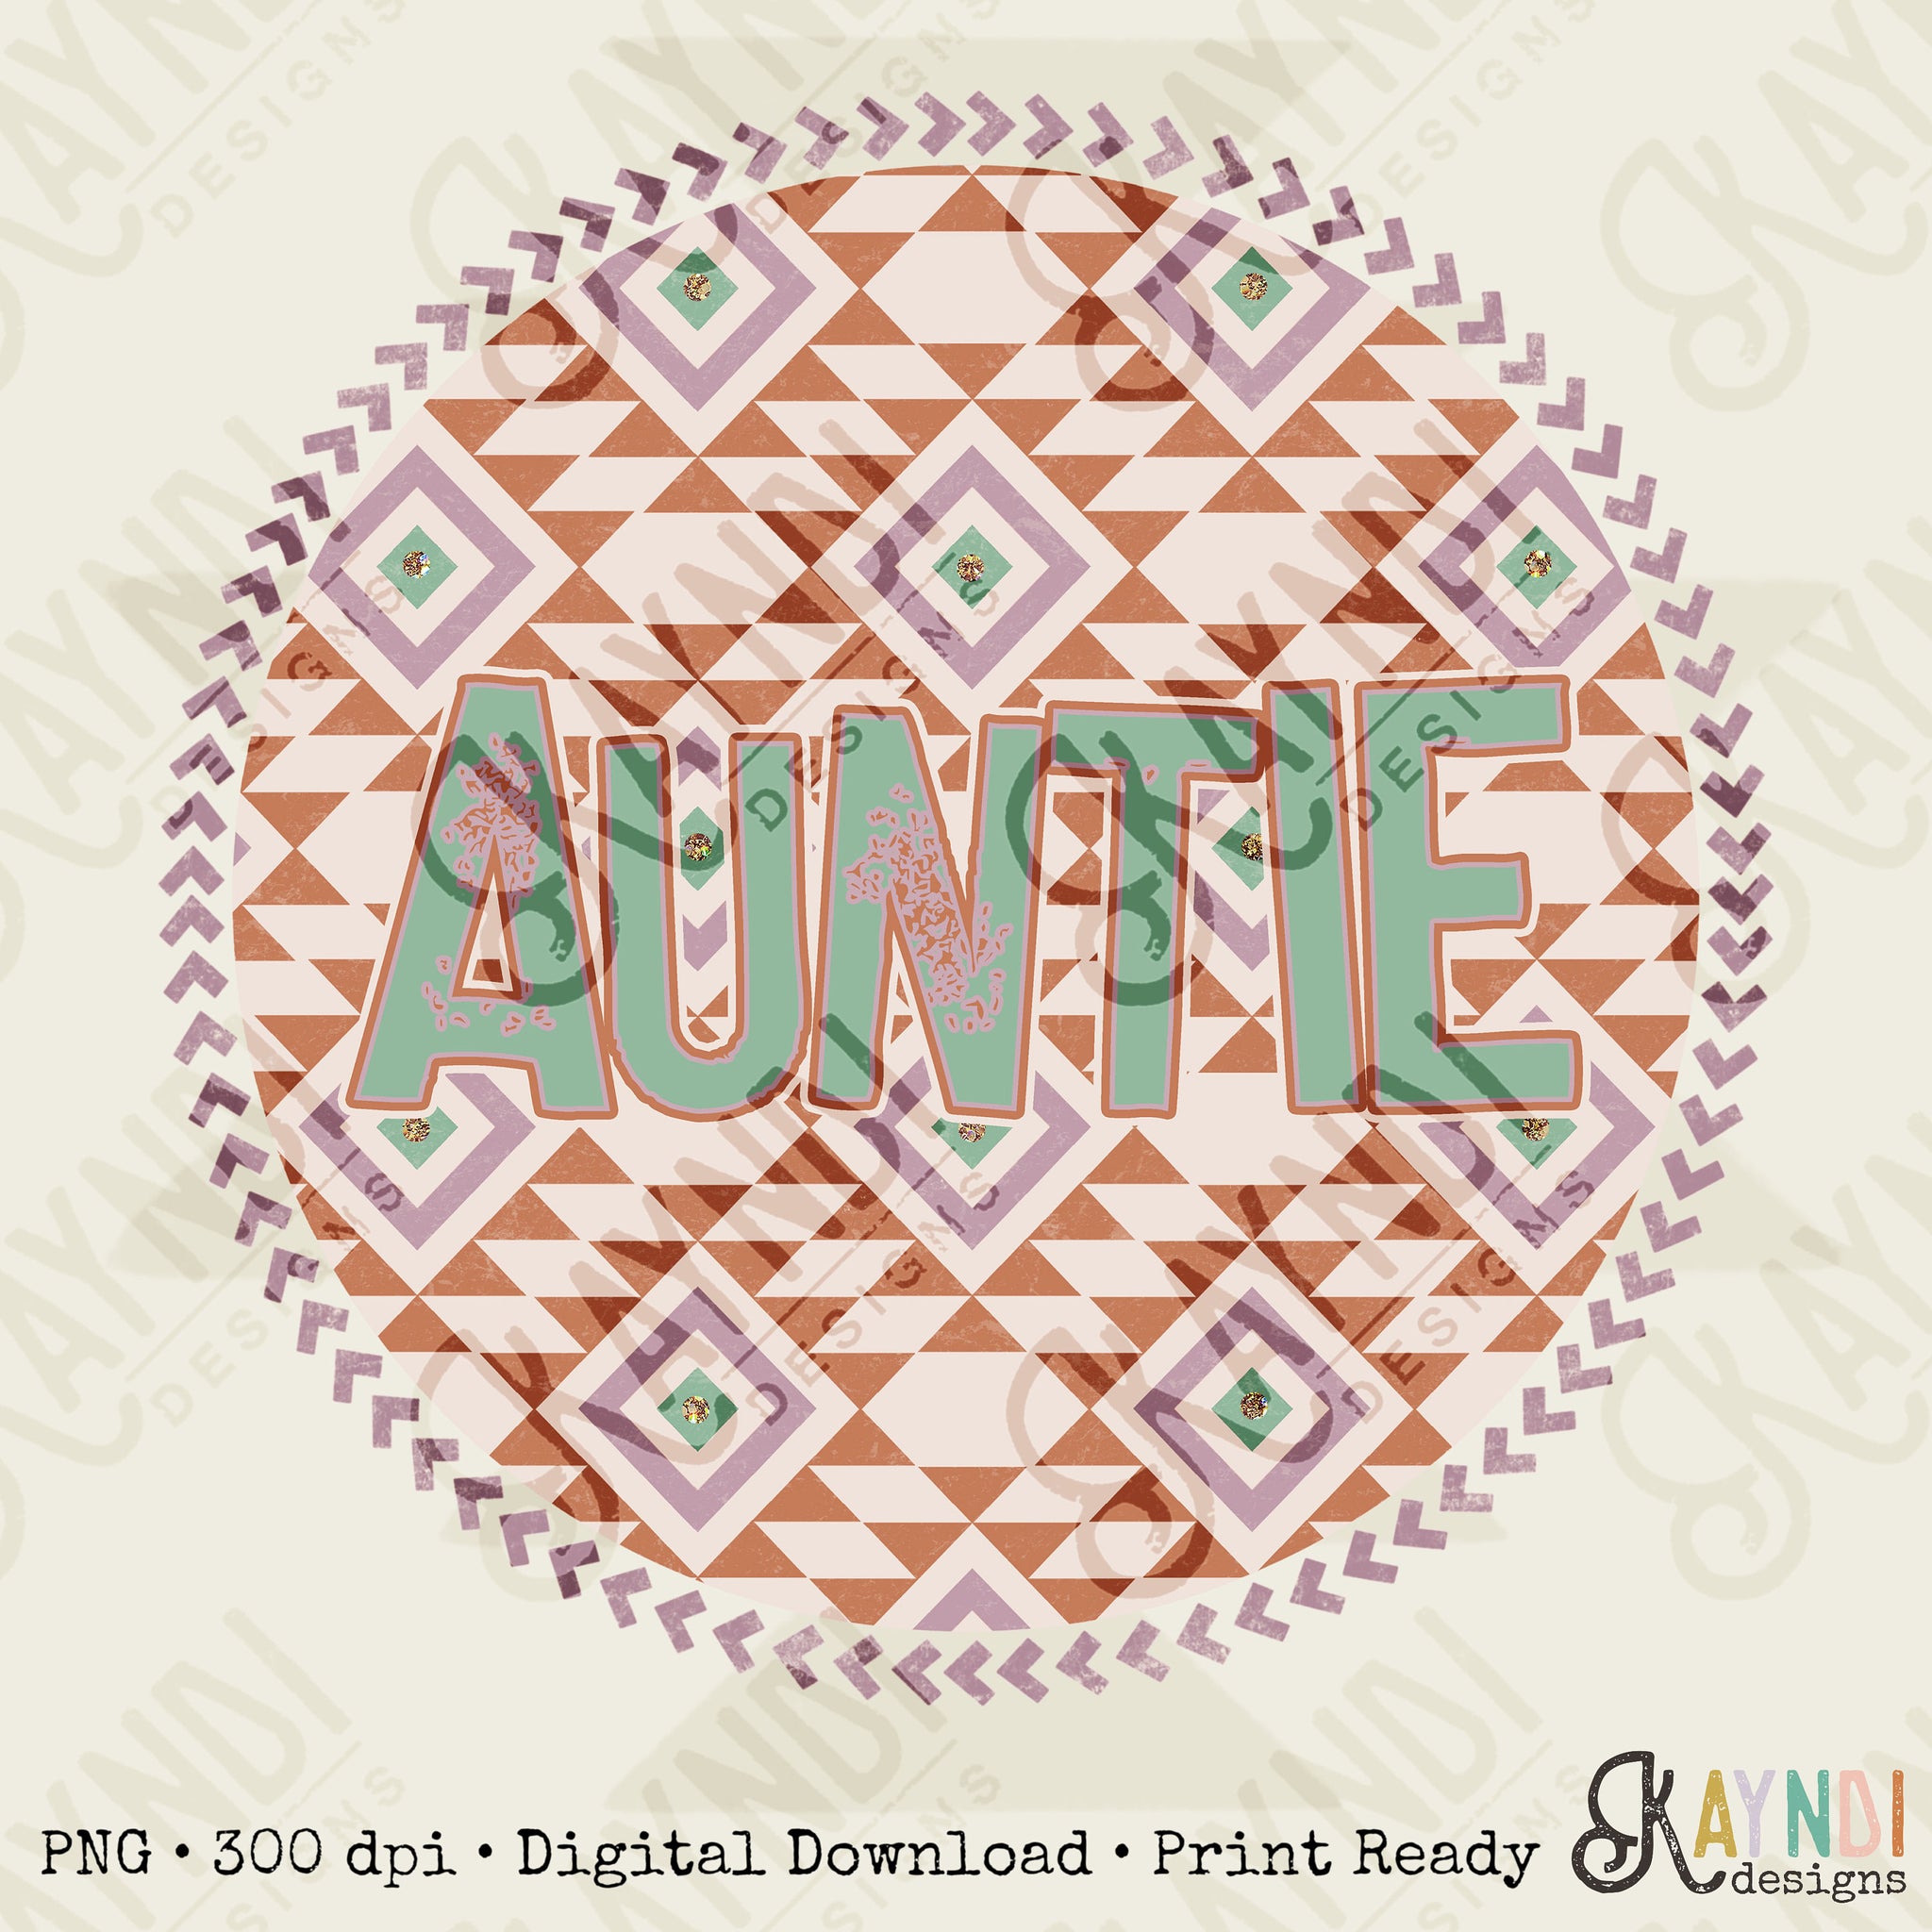 Auntie Pastel Tribal Sublimation Design PNG Digital Download Printable Leopard Mothers Day Mama Mini Cheetah Mom Momma Western Cow Print